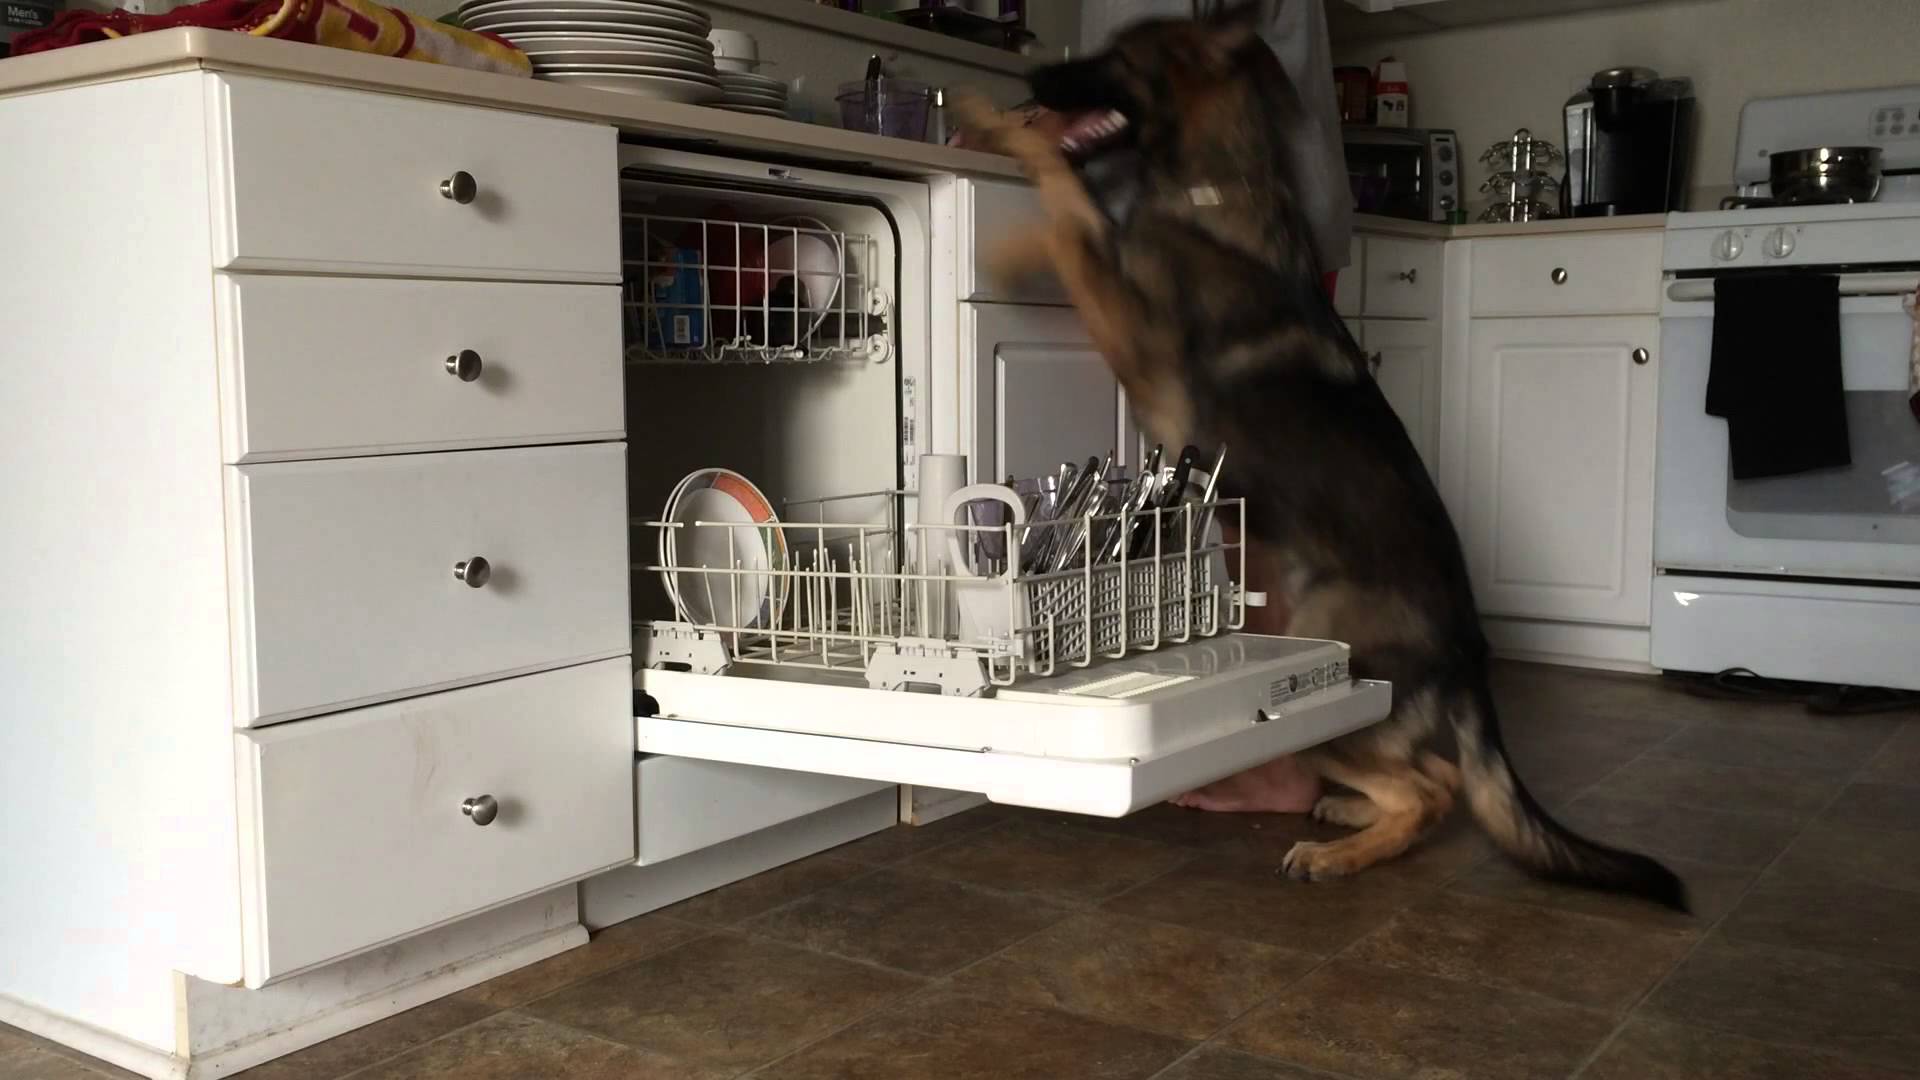 Baron the Service Dog Wants to Clean Your Kitchen